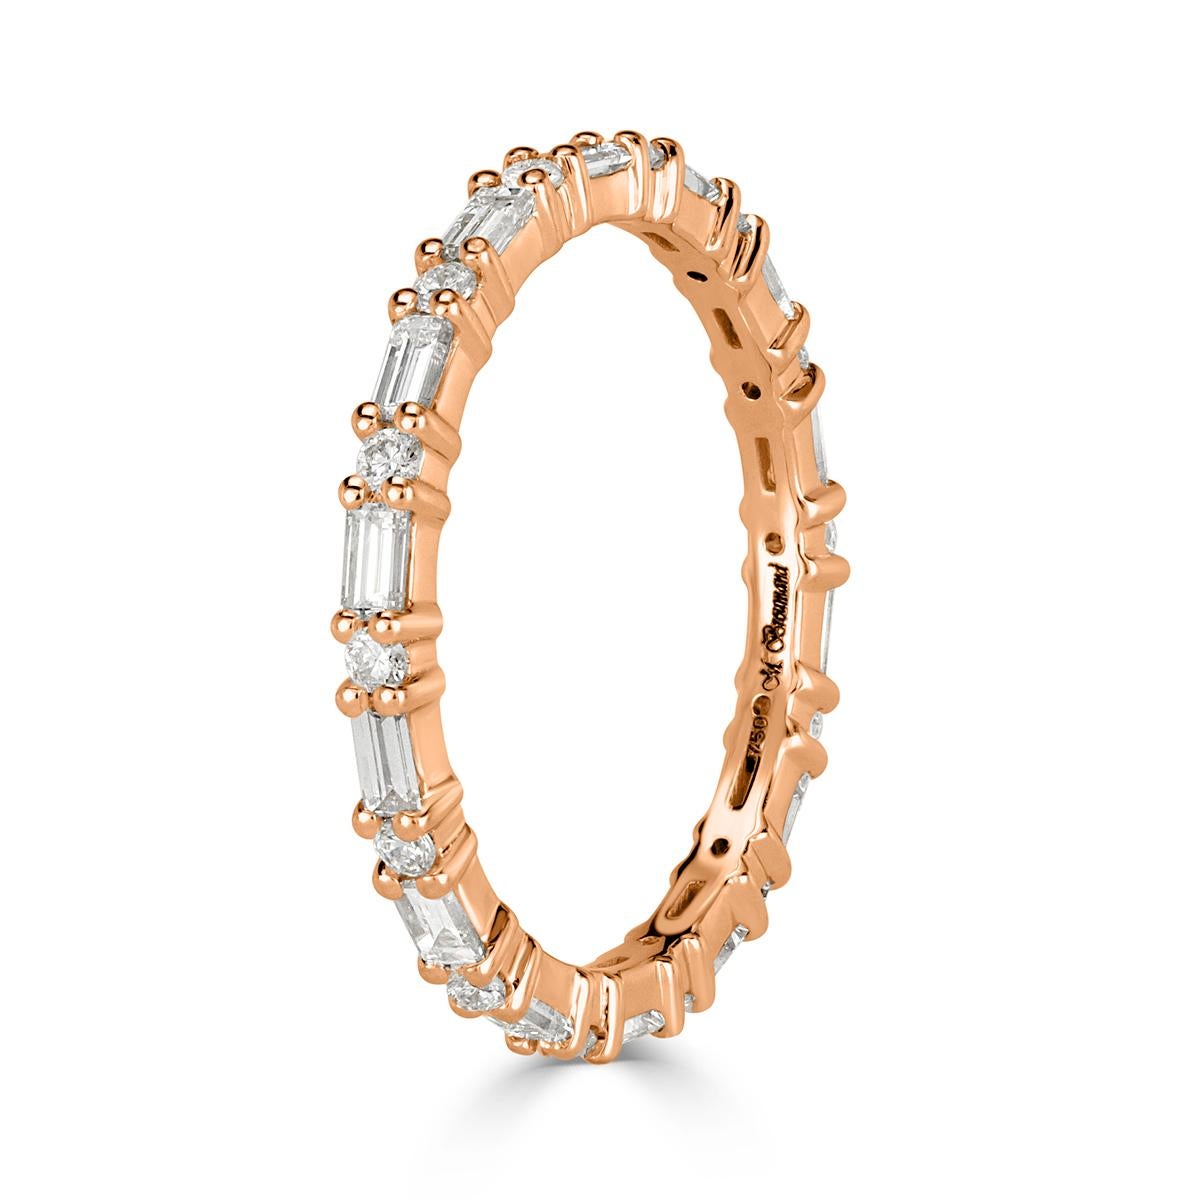 Handcrafted to perfection in 18k rose gold, this stunning diamond eternity band showcases 0.77ct of peerless white round and baguette cut diamonds set in an alternating way. The diamonds are graded at E-F in color, VS1-VS2 in clarity. All eternity